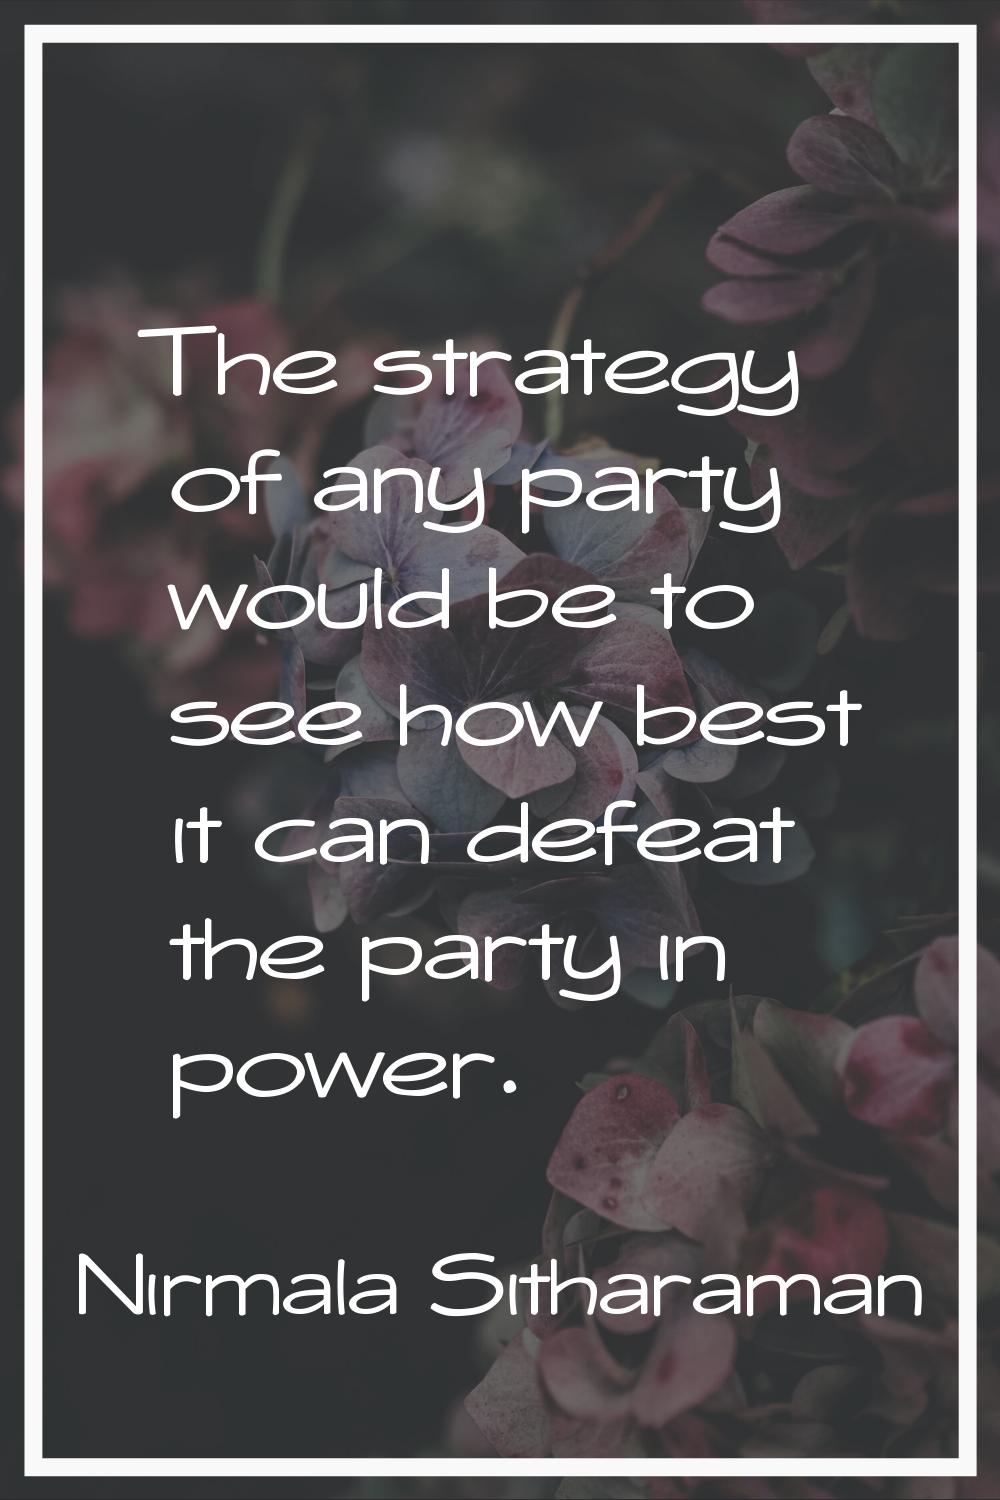 The strategy of any party would be to see how best it can defeat the party in power.